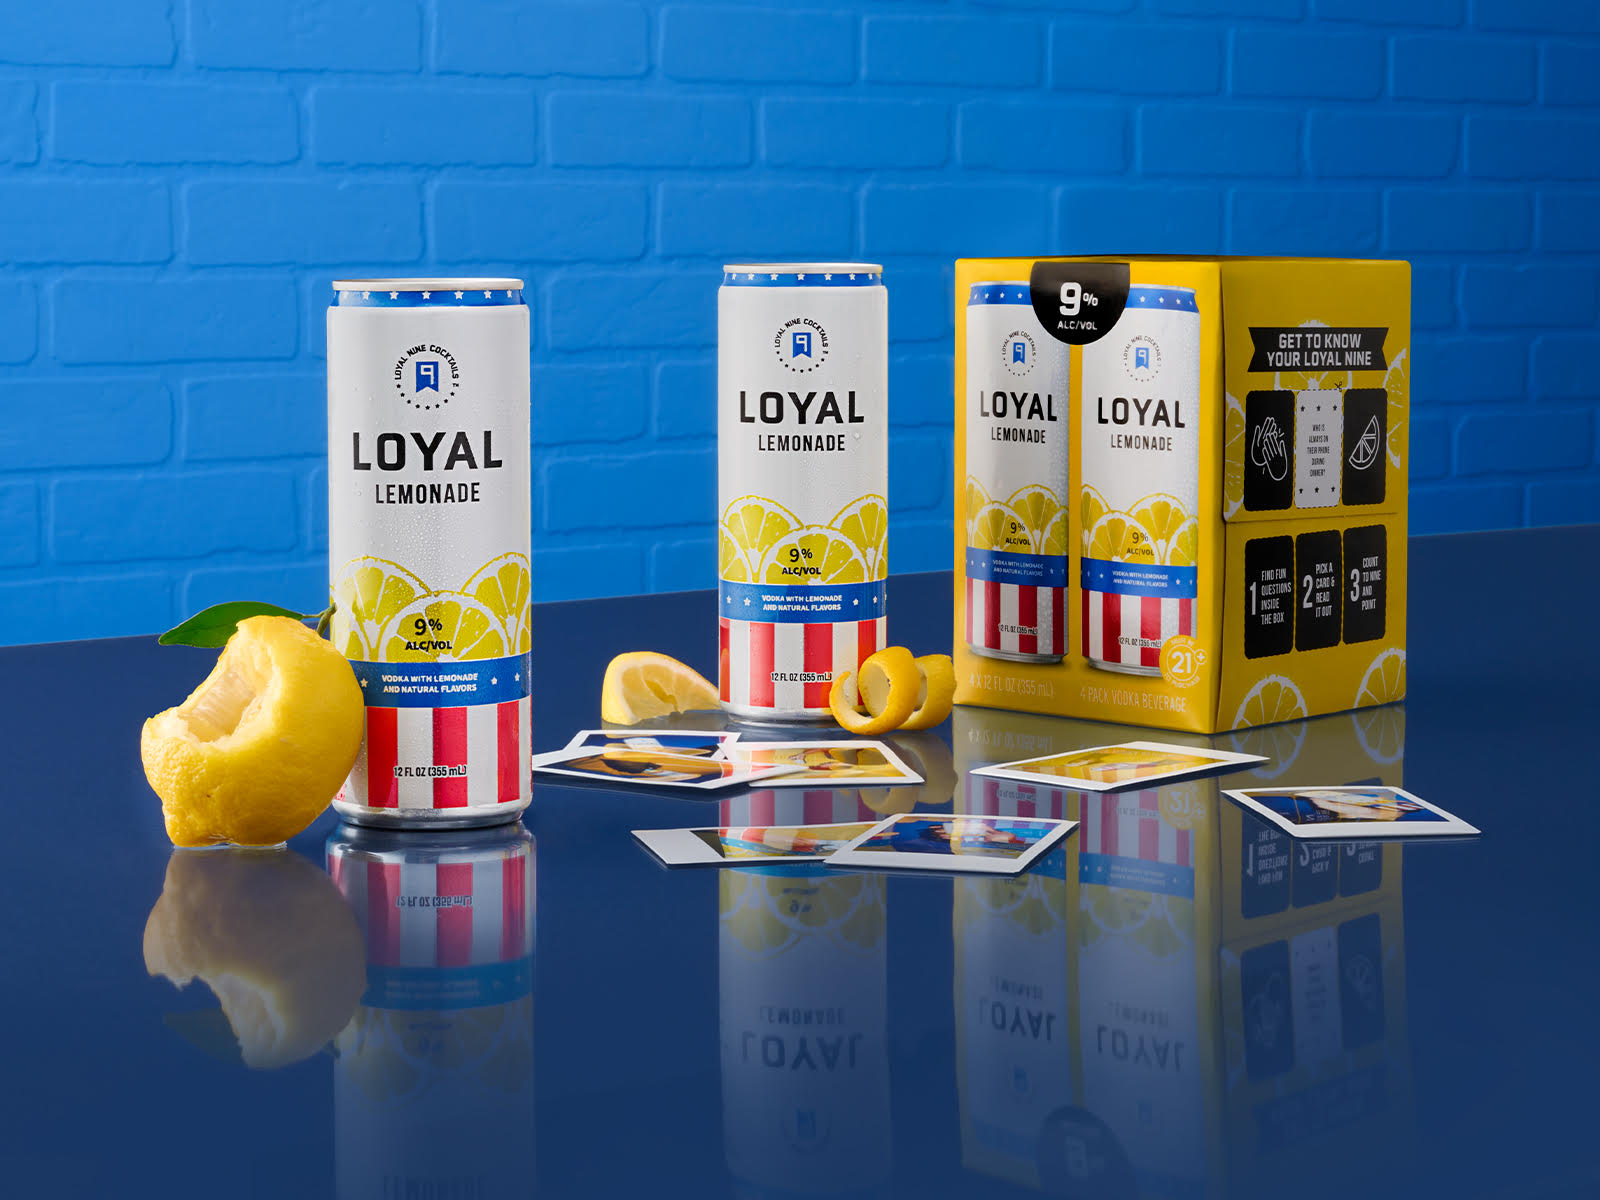 Loyal 9 Lemonade Can with 4 pack